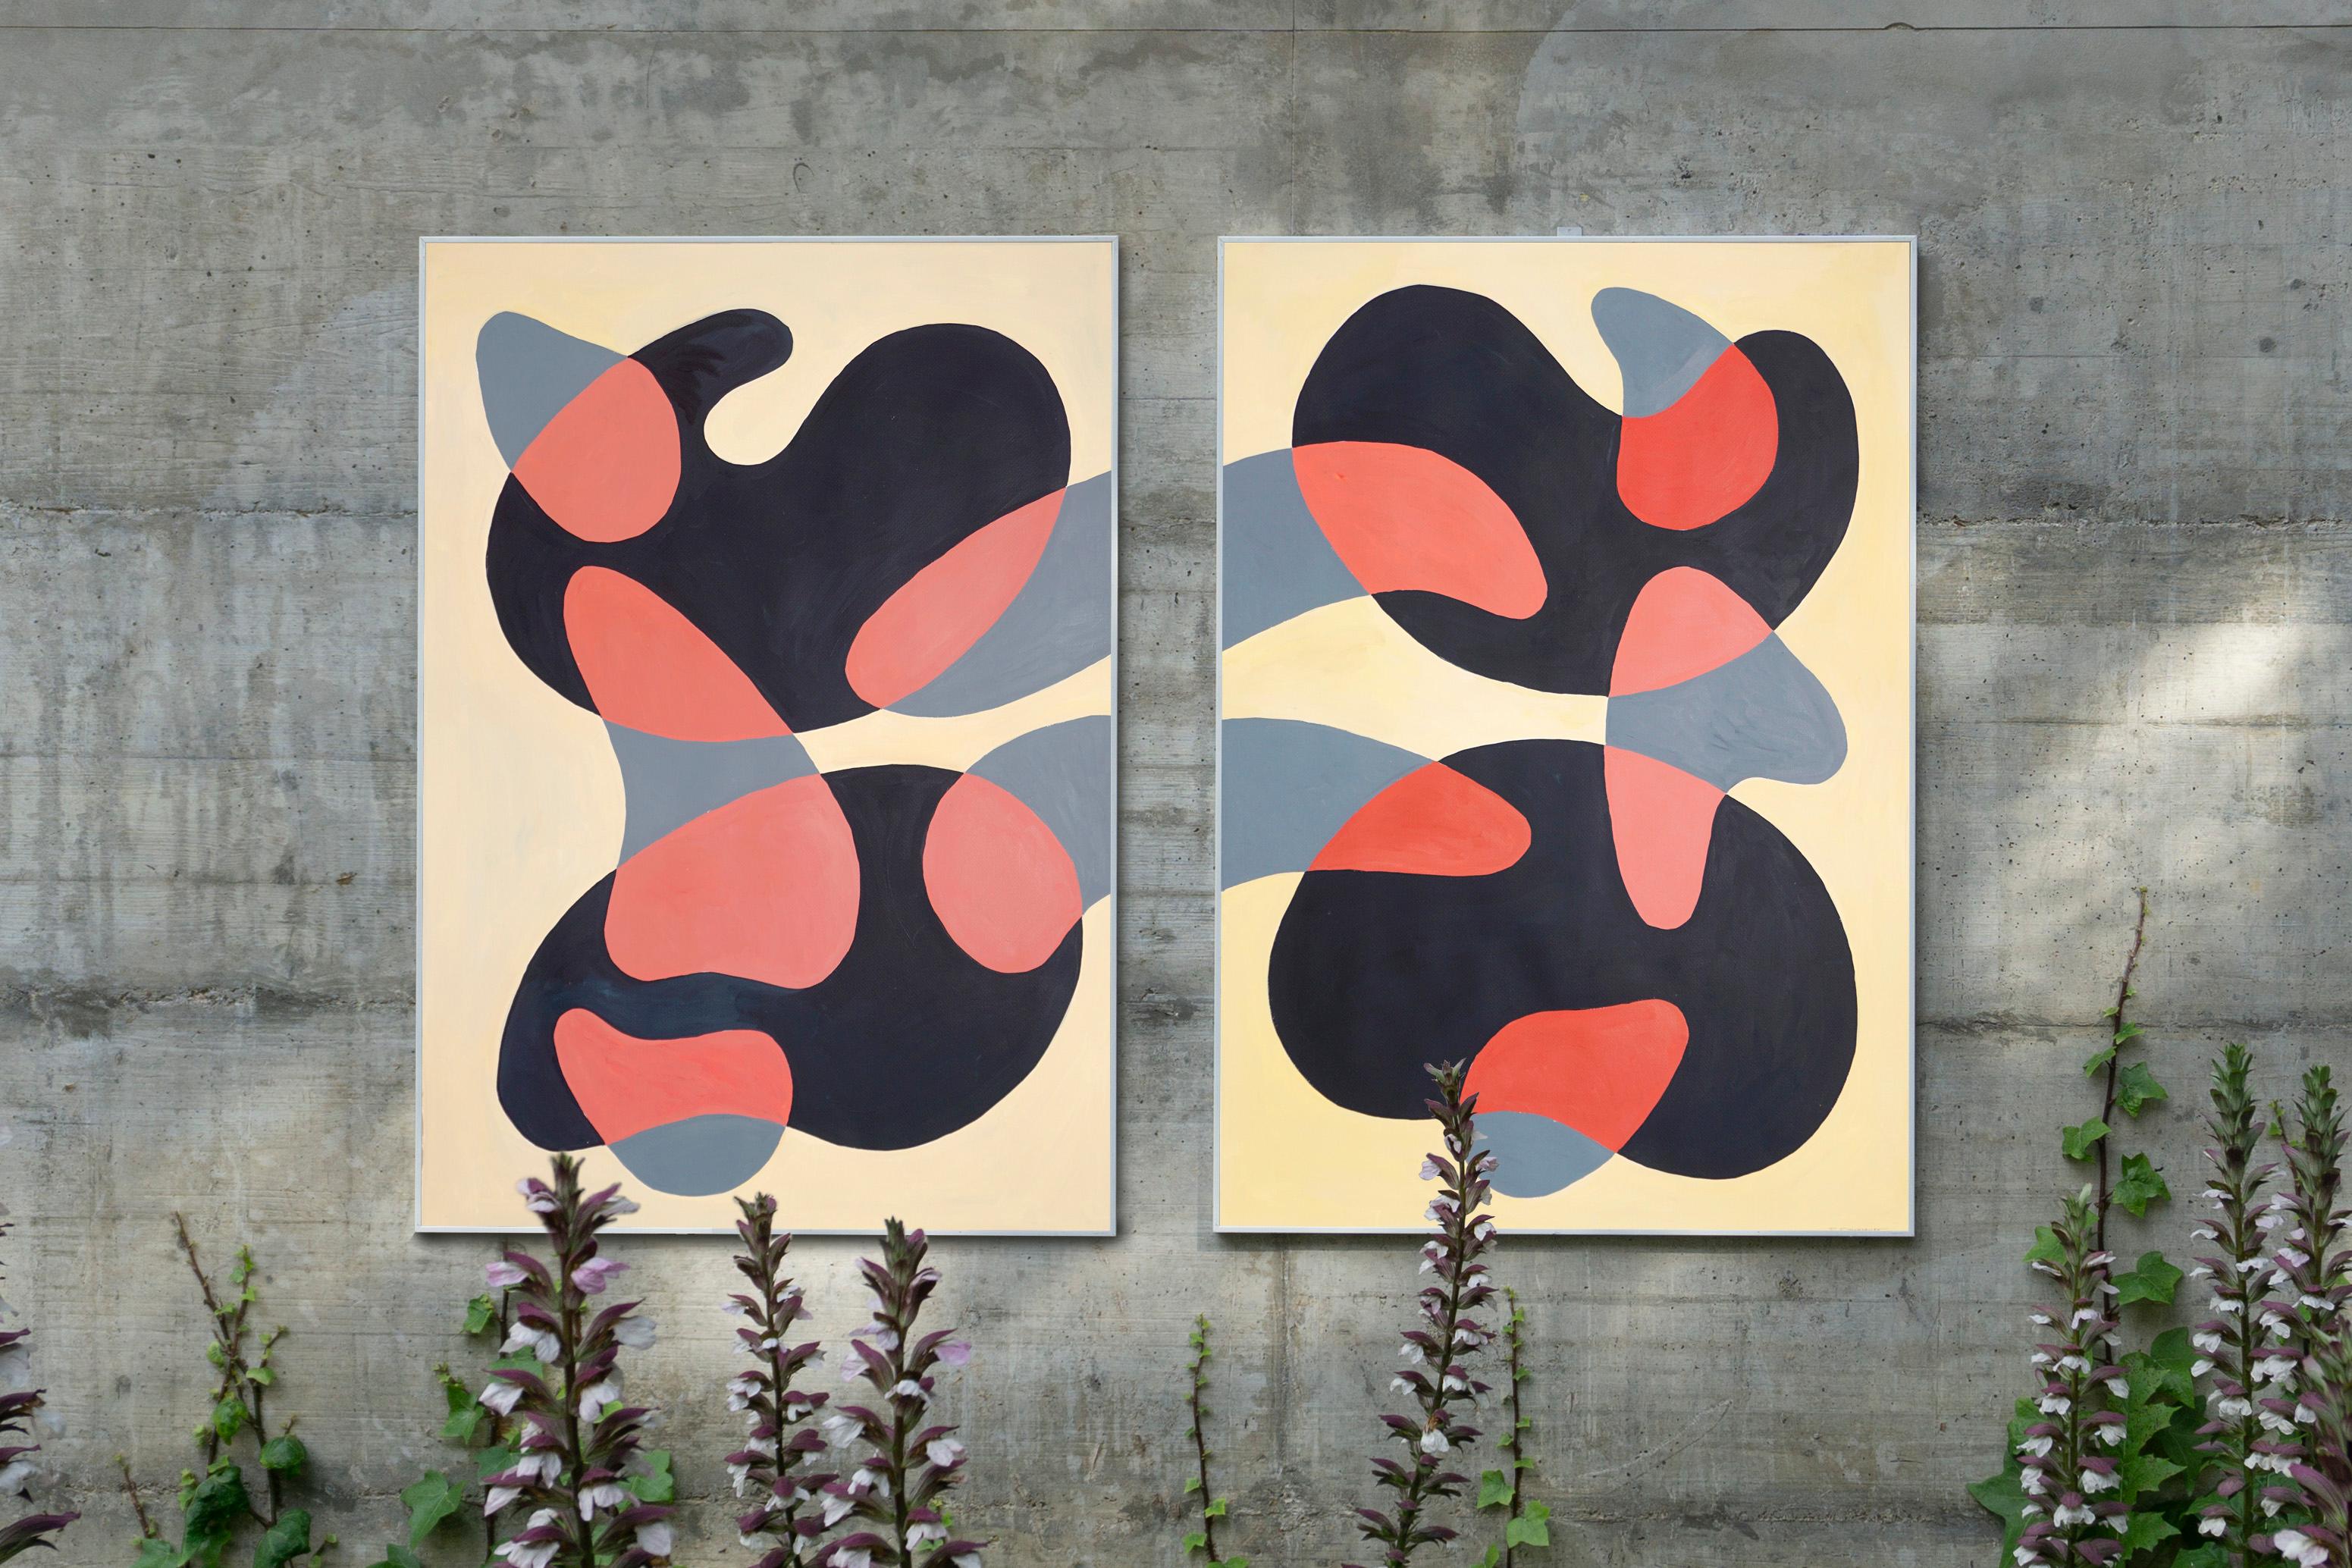 Lights and Shadows, Mid-Century Modern Abstract Shapes Diptych, Black, Red Gray  6